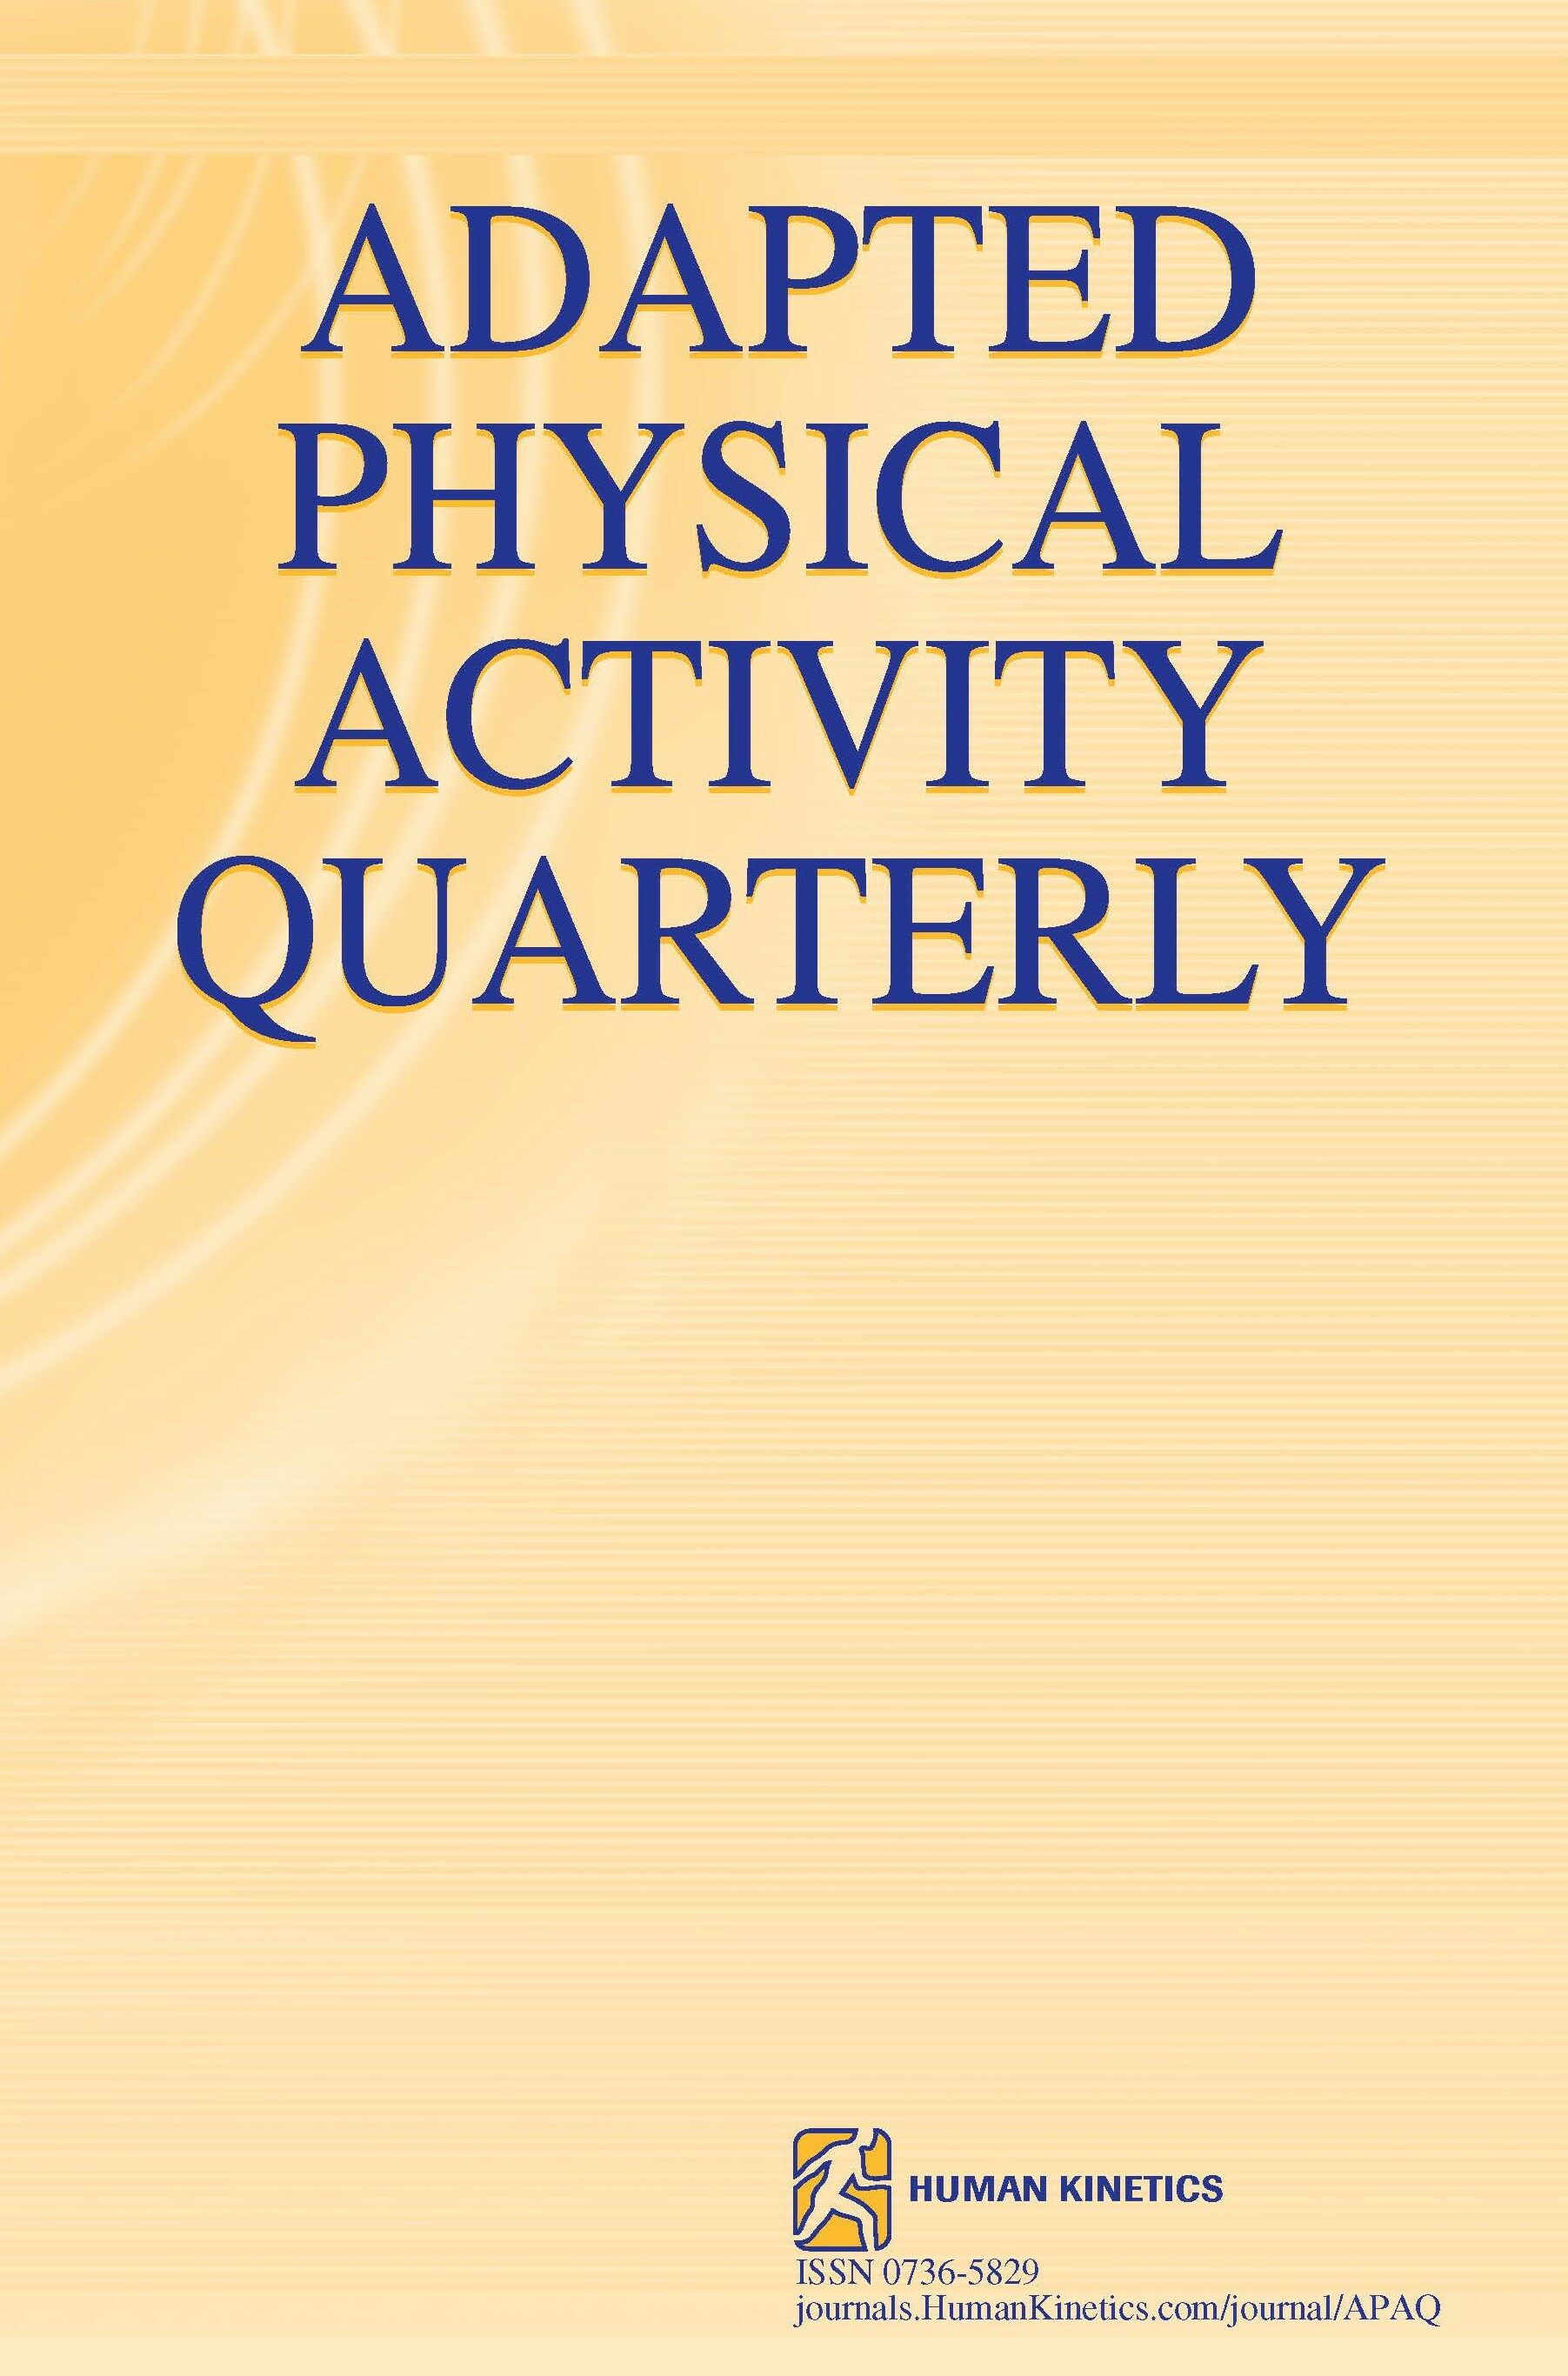 Development and Pilot Testing of the Disability Awareness Training and Education Program Among Community-Based Group Fitness Instructors